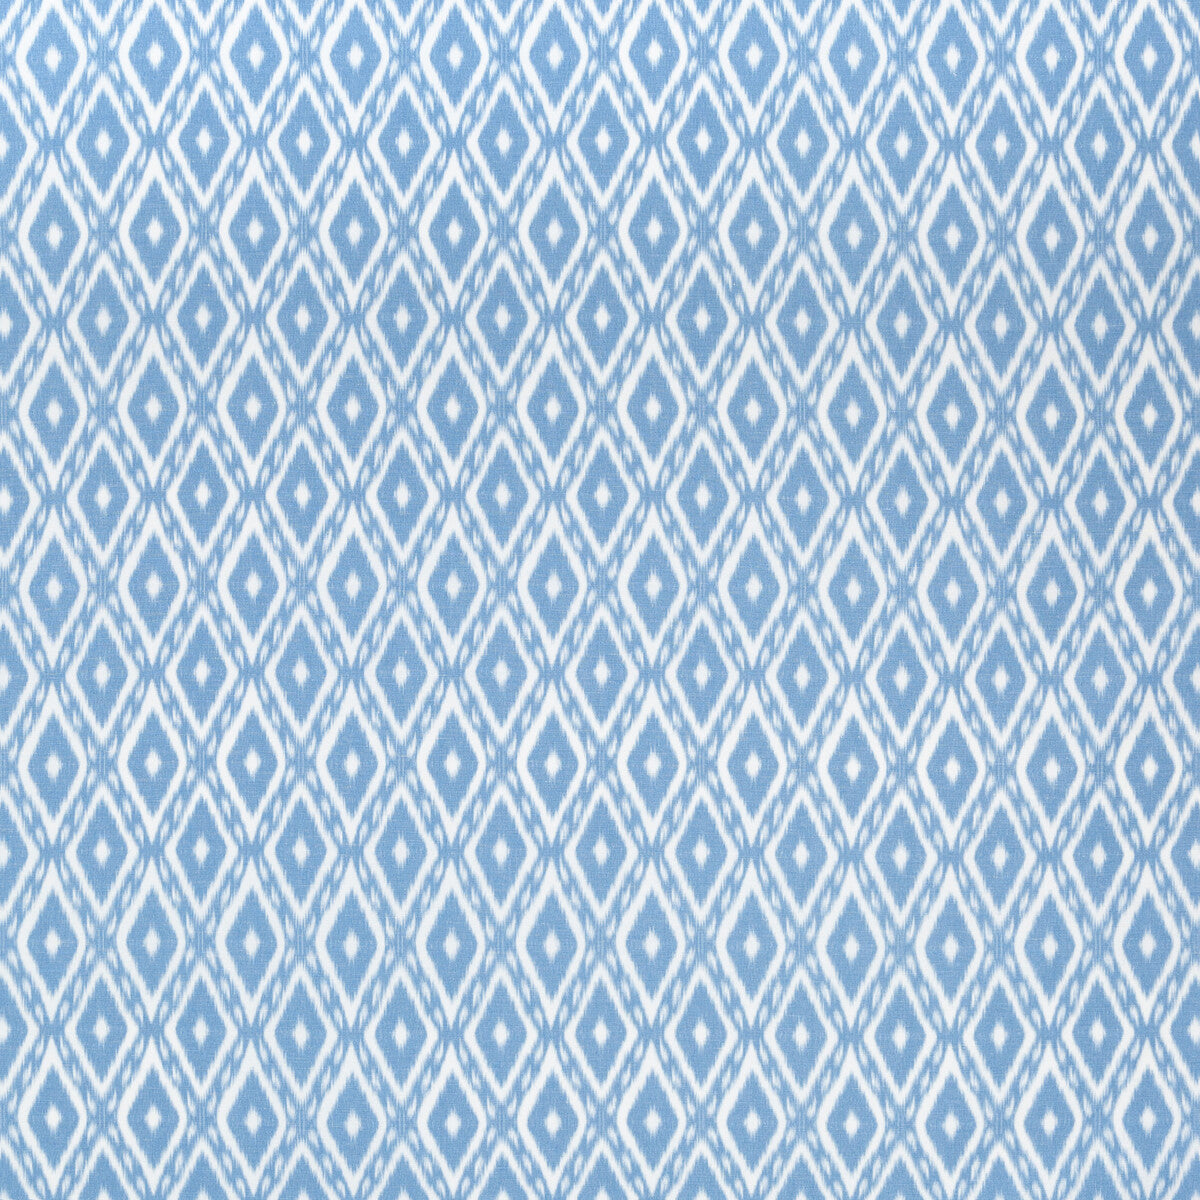 Bartow Print fabric in blue color - pattern 2020182.5.0 - by Lee Jofa in the Avondale collection